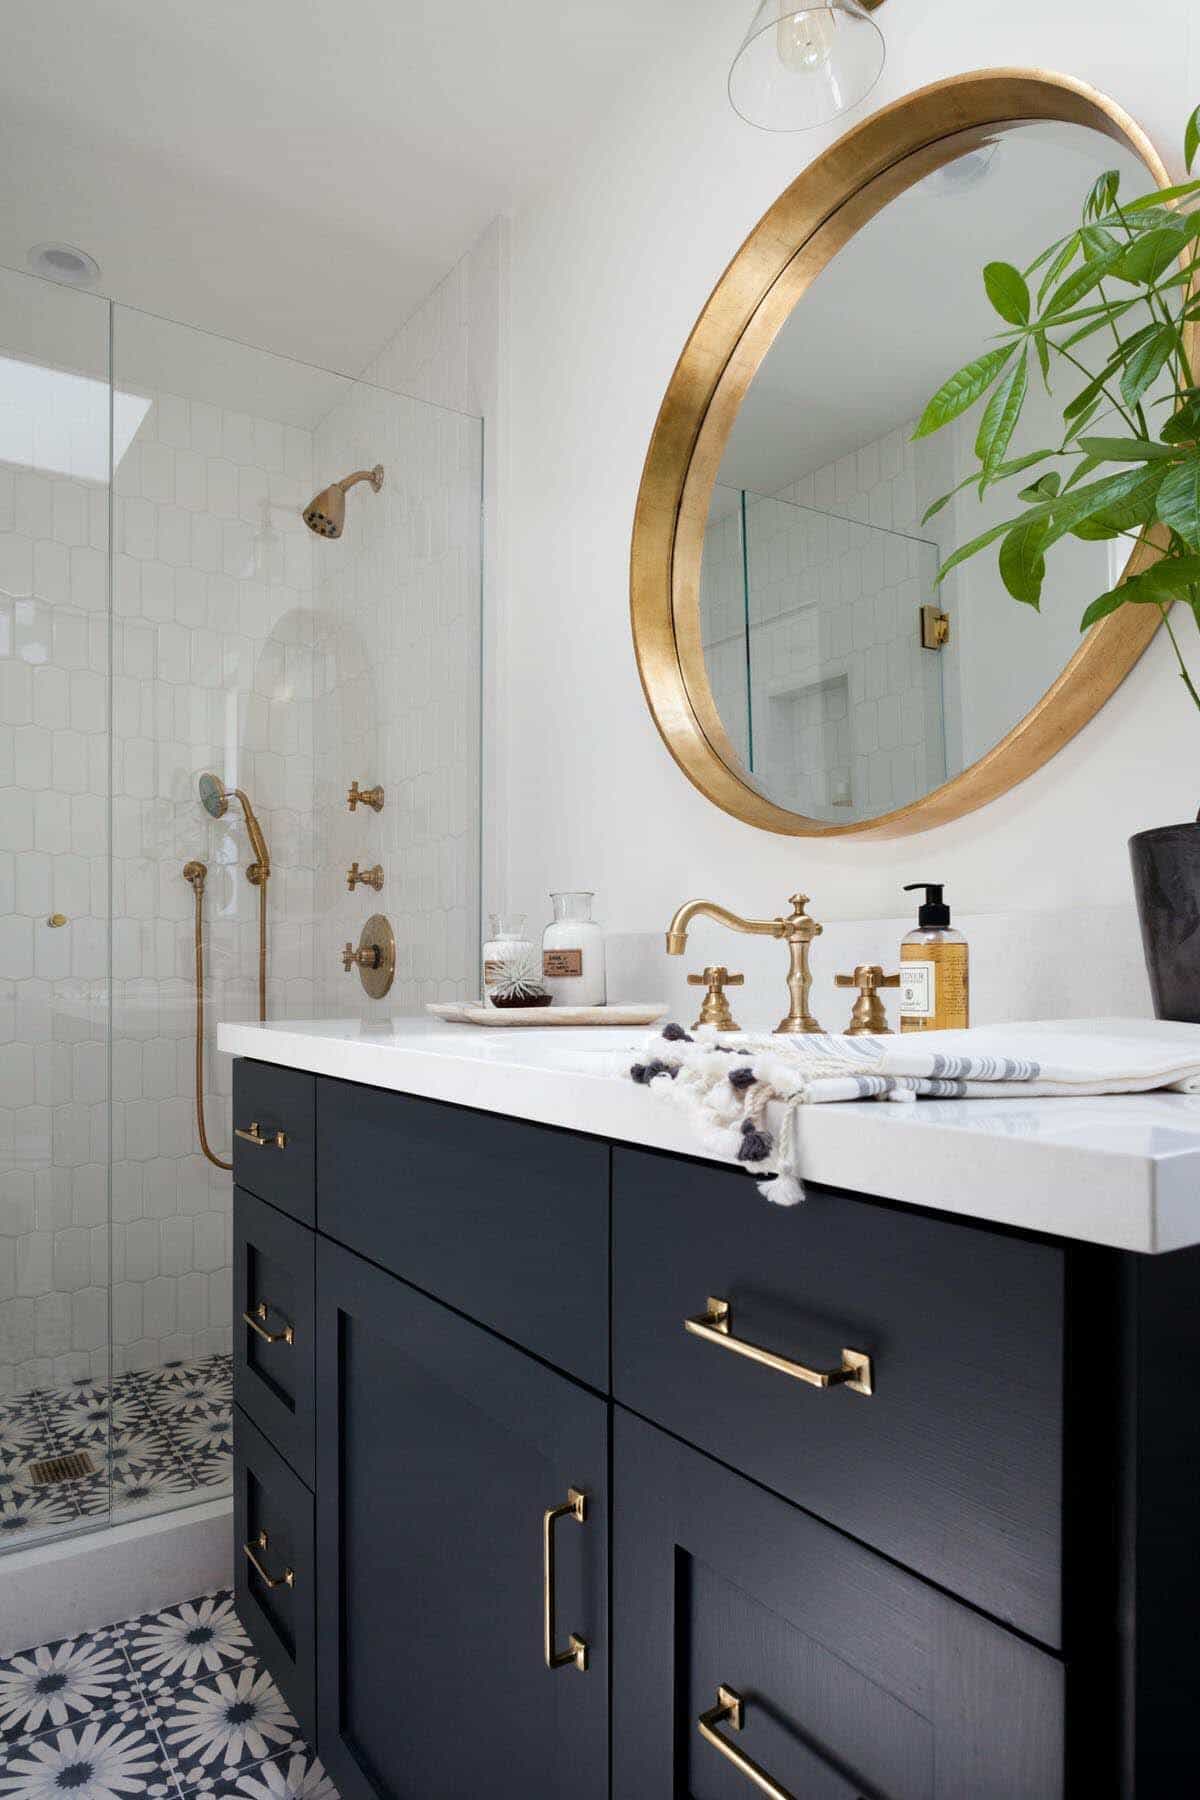 25 Incredibly Stylish Black And White Bathroom Ideas To Inspire